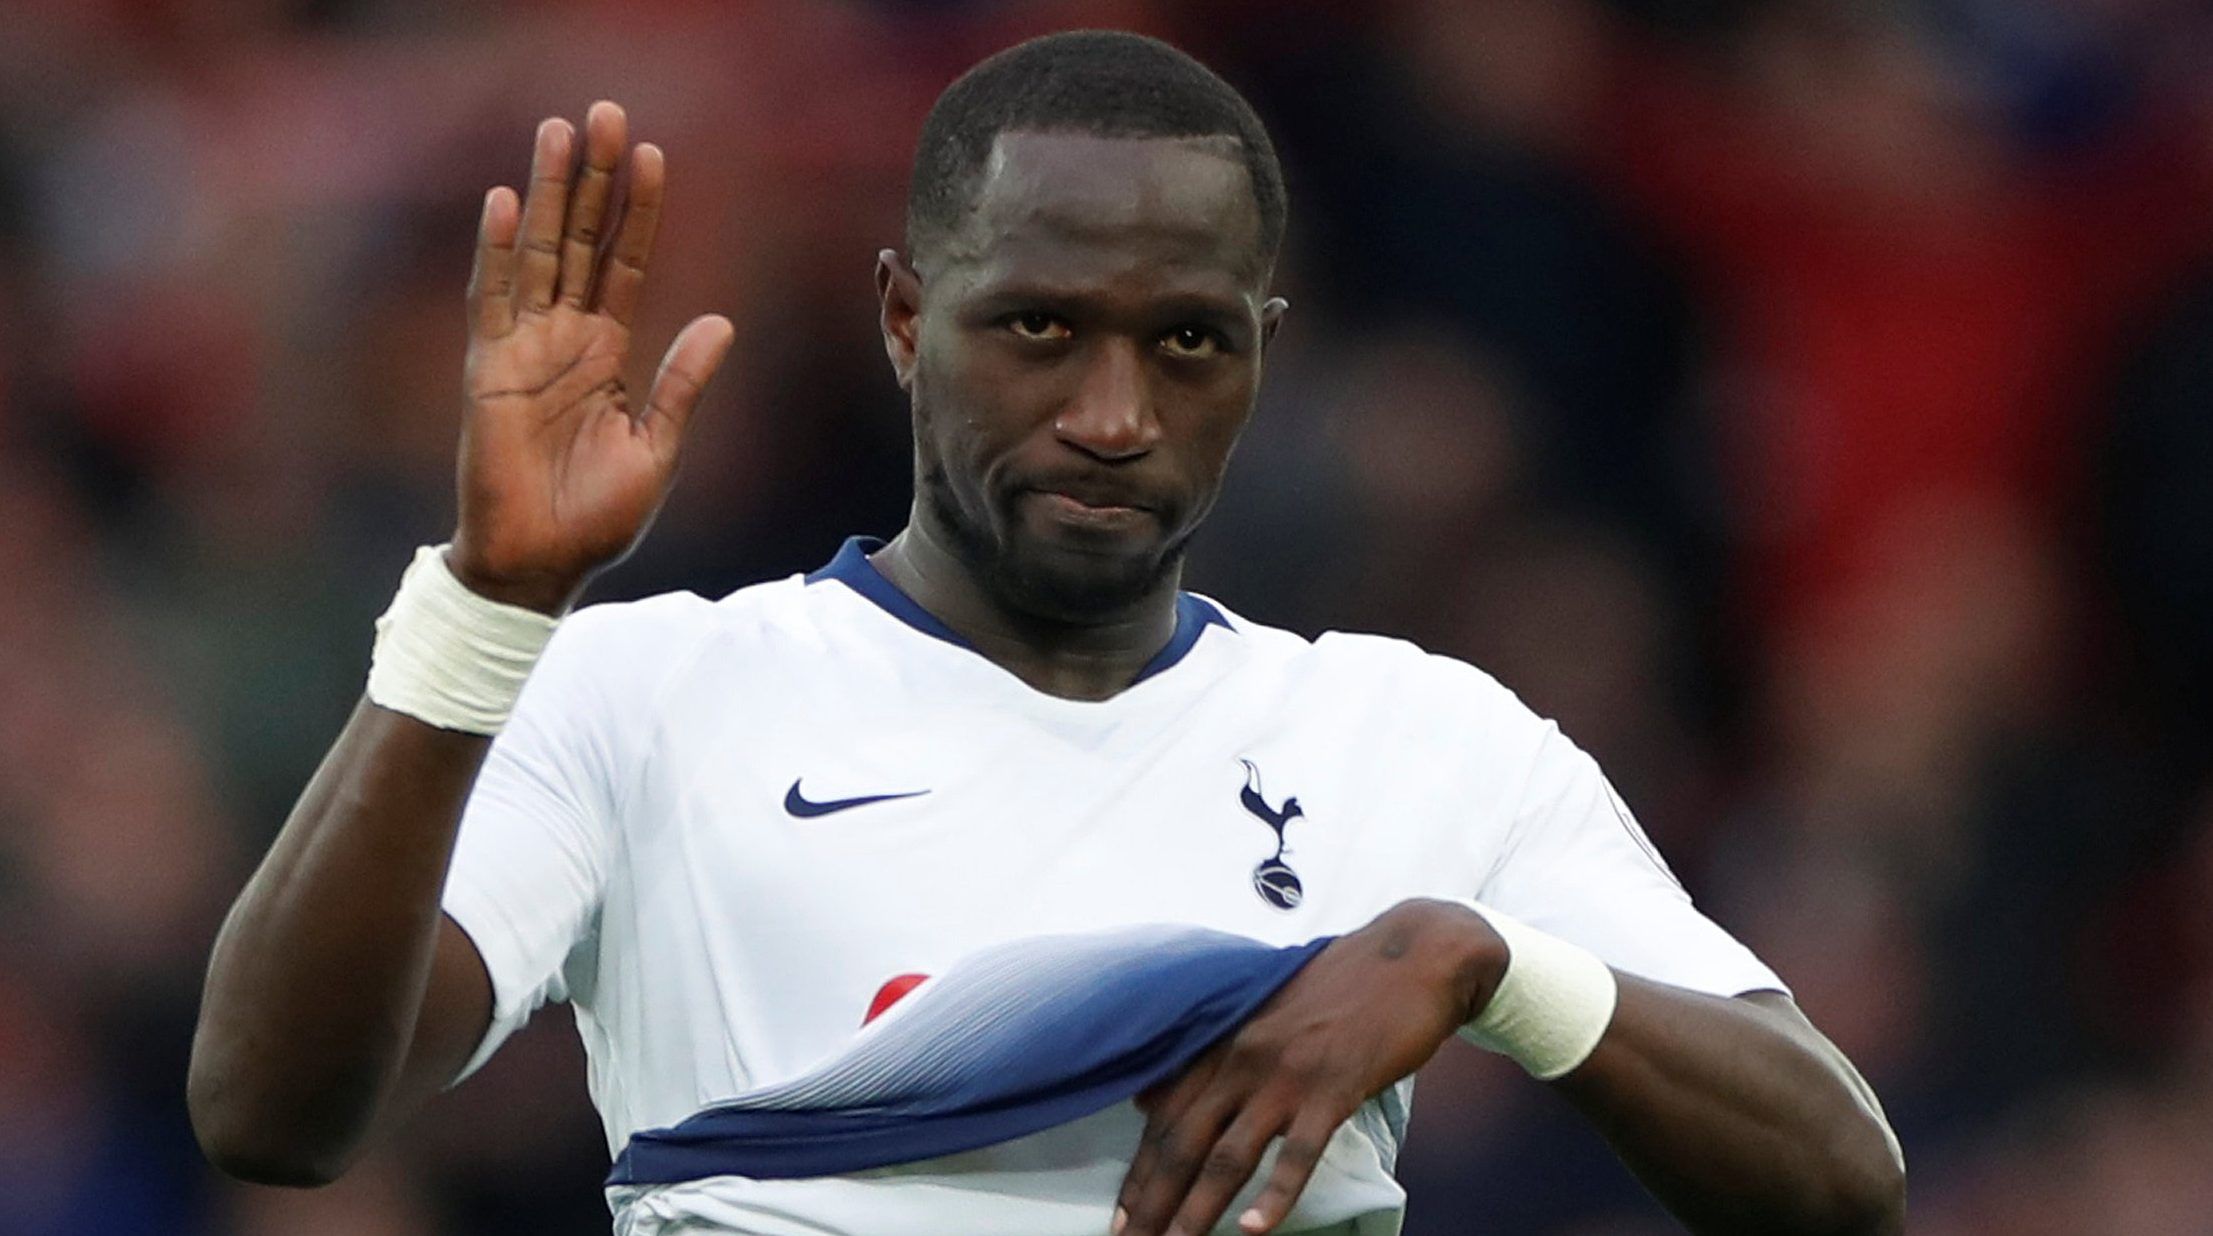 Soccer Football - Premier League - Liverpool v Tottenham Hotspur - Anfield, Liverpool, Britain - March 31, 2019  Tottenham's Moussa Sissoko reacts after the match                   Action Images via Reuters/Paul Childs  EDITORIAL USE ONLY. No use with unauthorized audio, video, data, fixture lists, club/league logos or 